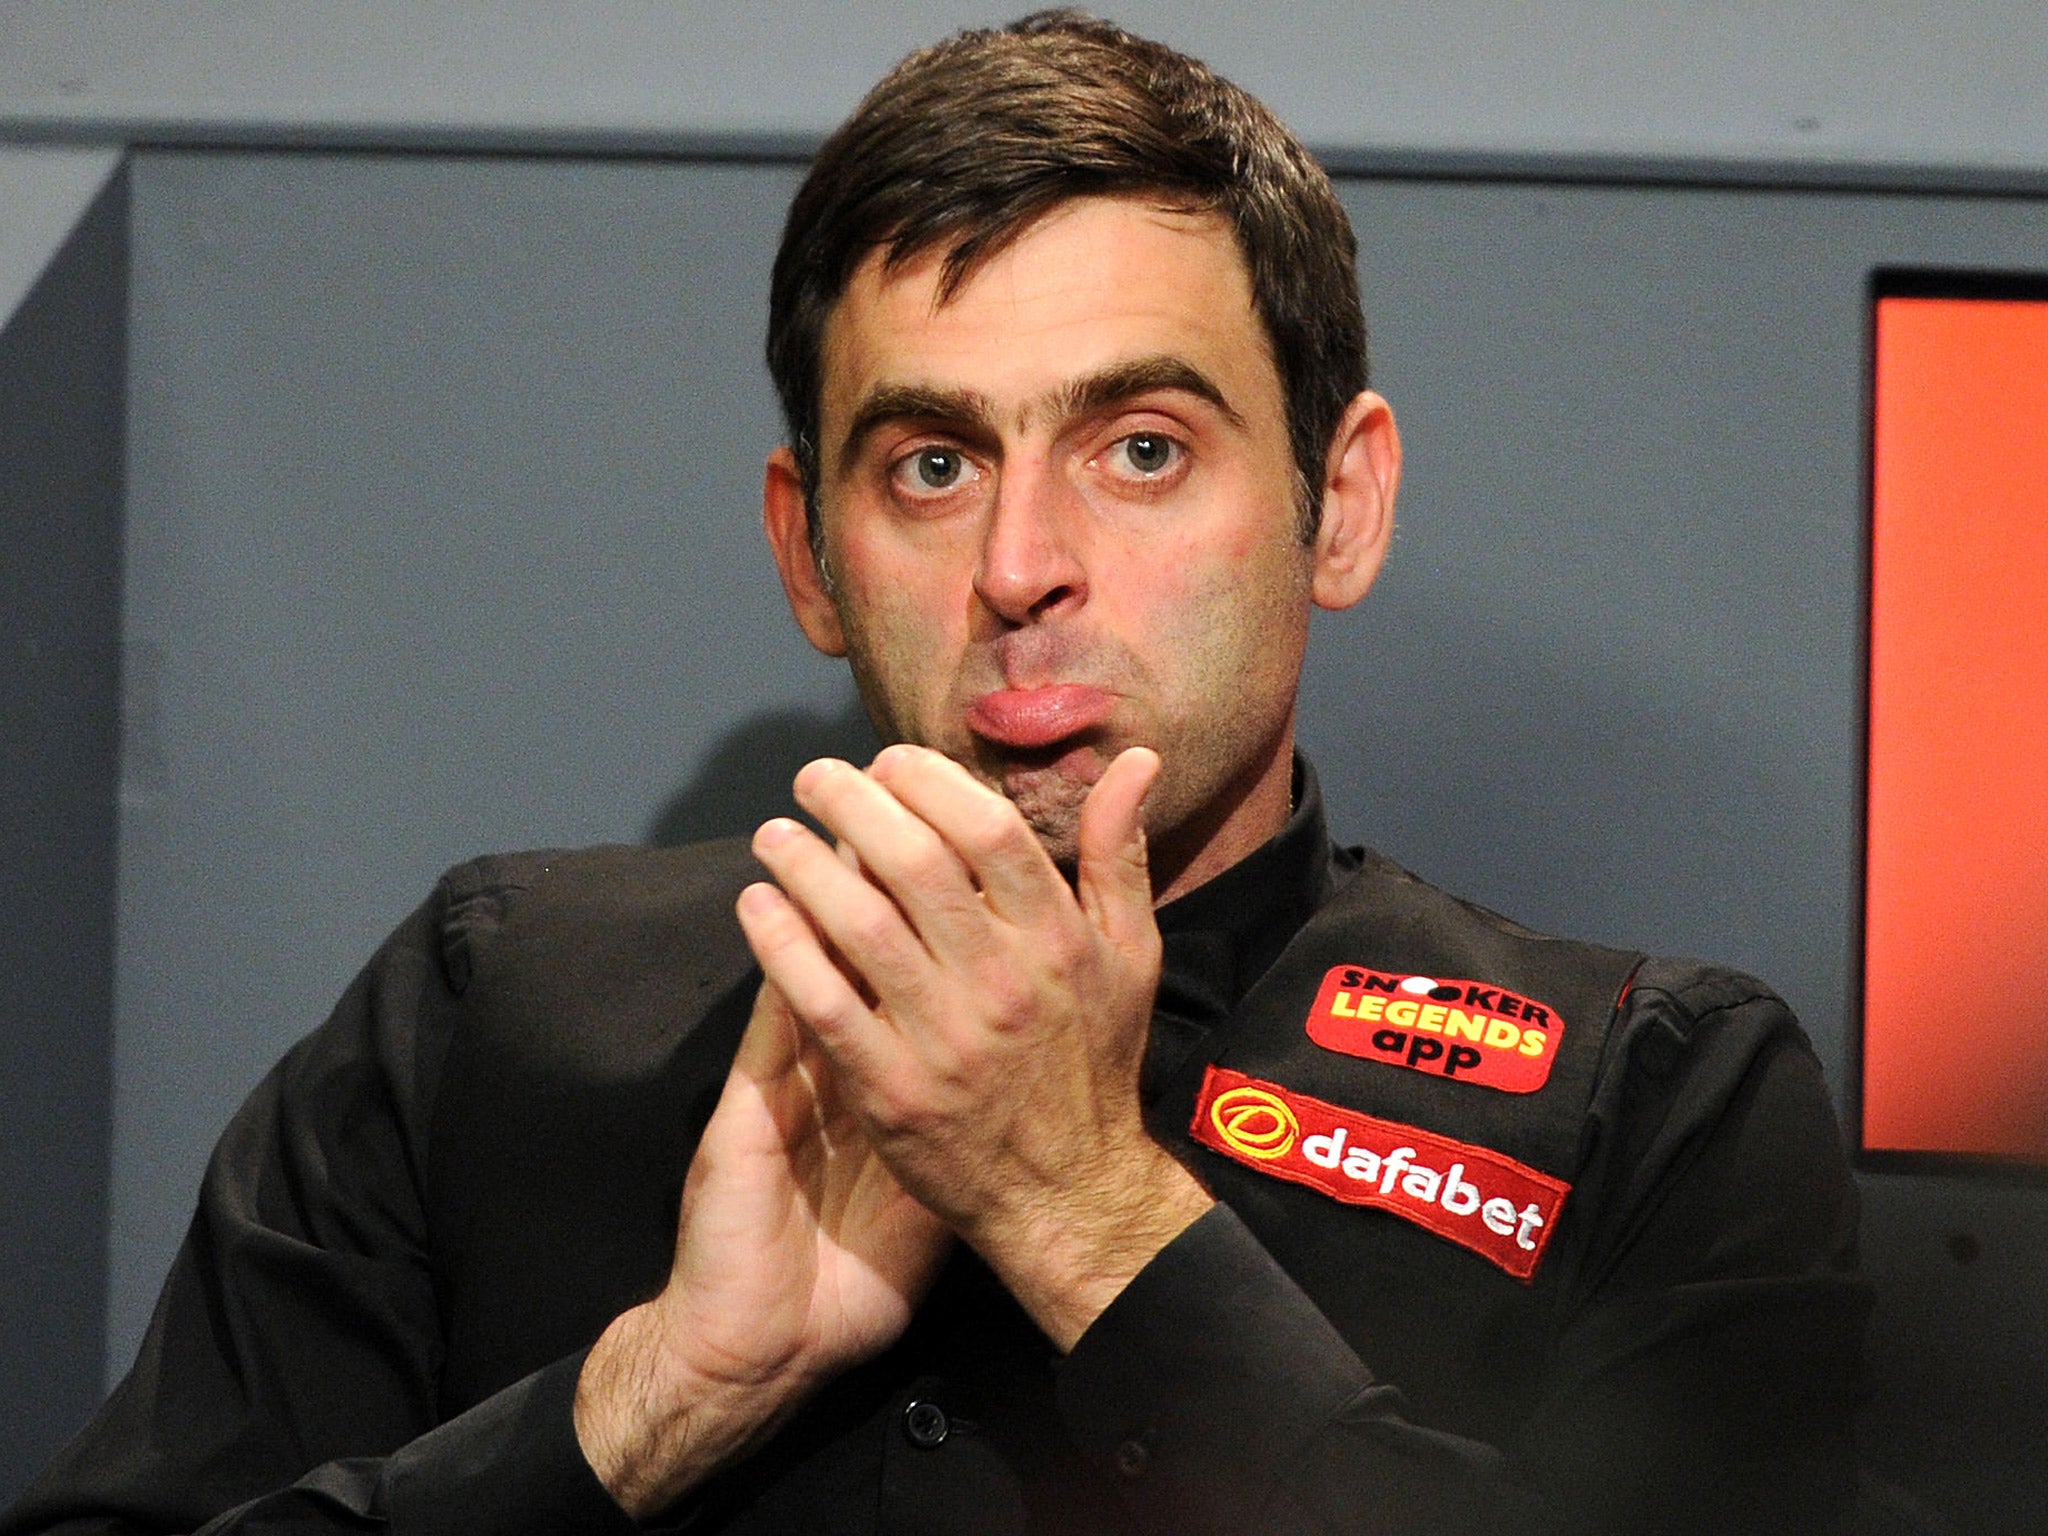 At least Ronnie O’Sullivan said he was still ‘very content’ despite losing to Mark Selby